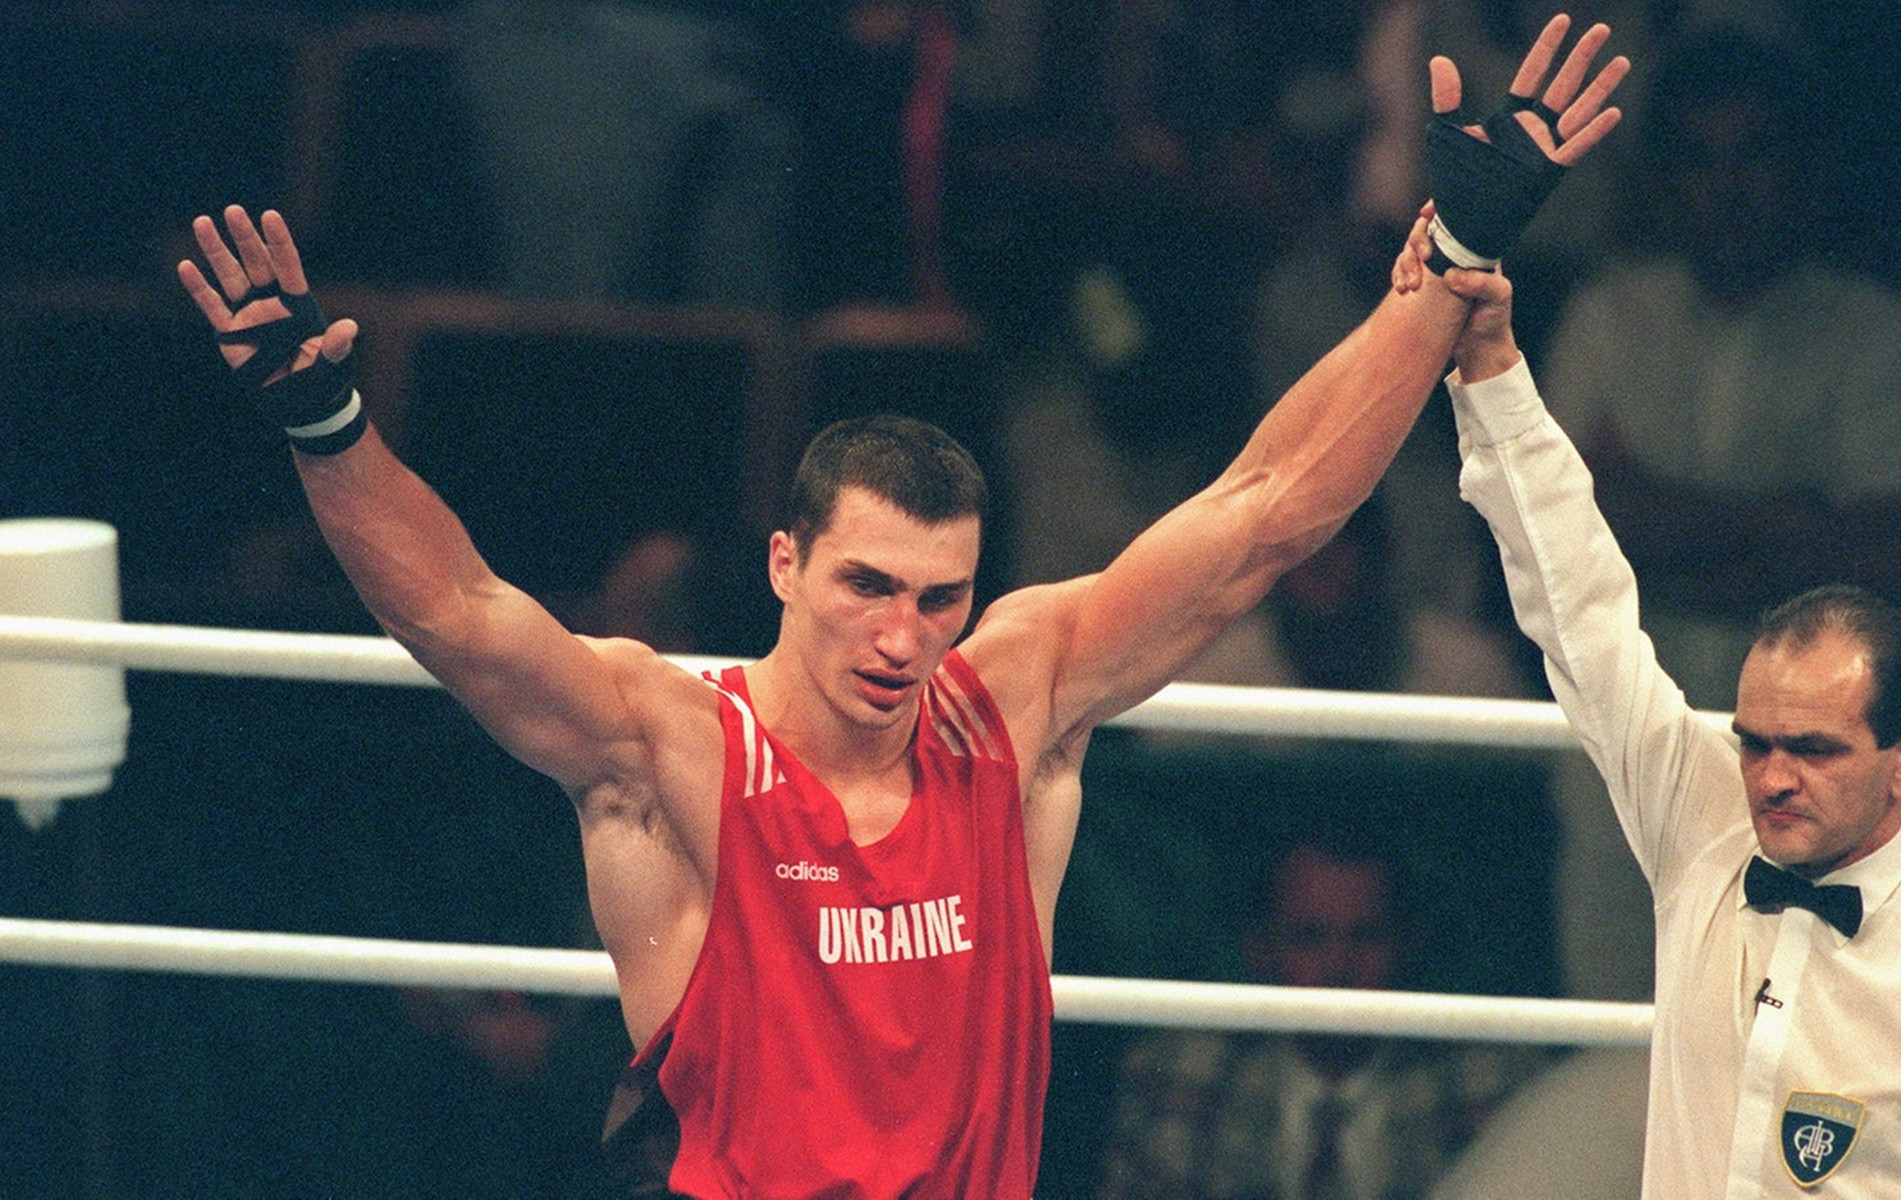 Wladimir Klitschko has claimed winning Olympic gold in the super-heavyweight division at Atlanta 1996 was 